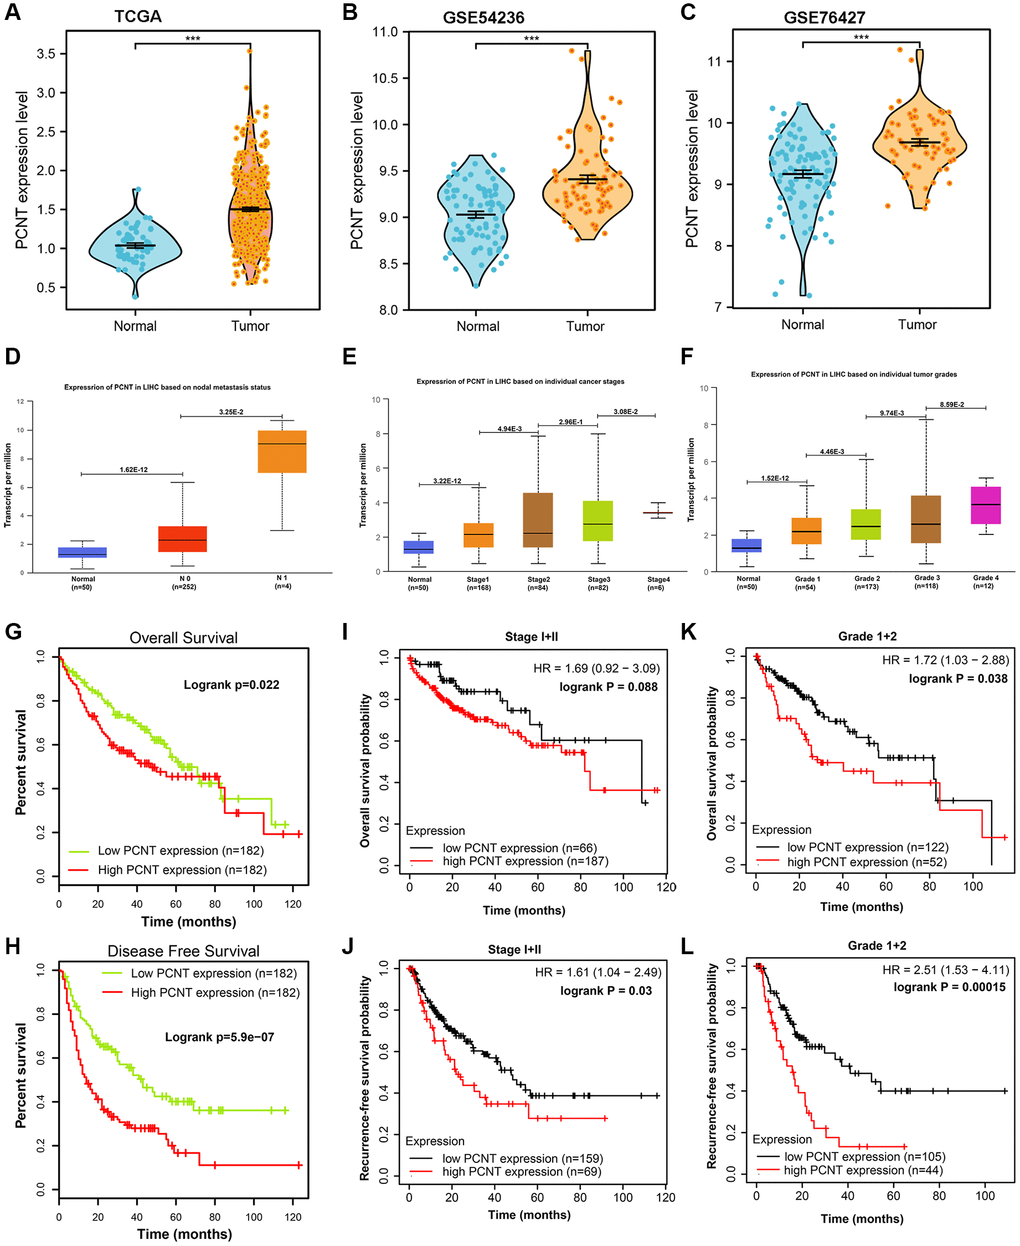 Expression and clinical role of PCNT mRNA in HCC. (A–C) PCNT mRNA levels in HCC and normal tissues in TCGA (A), GSE54236 (B), and GSE76427 (C) datasets. (D) PCNT mRNA levels in HCC tissues with lymph node metastasis. (E, F) PCNT mRNA gradually elevated with the tumor stage (E) and grades increased (F). (G, H) Higher PCNT mRNA levels correlated to poor OS (G) and disease-free survival (H). (I, J) Higher PCNT mRNA levels correlated to poor OS (I) and RFS (J) in stage I/II patients. (K, L) Higher PCNT mRNA levels correlated to poor OS (K) and RFS (L) in grade I/II patients.